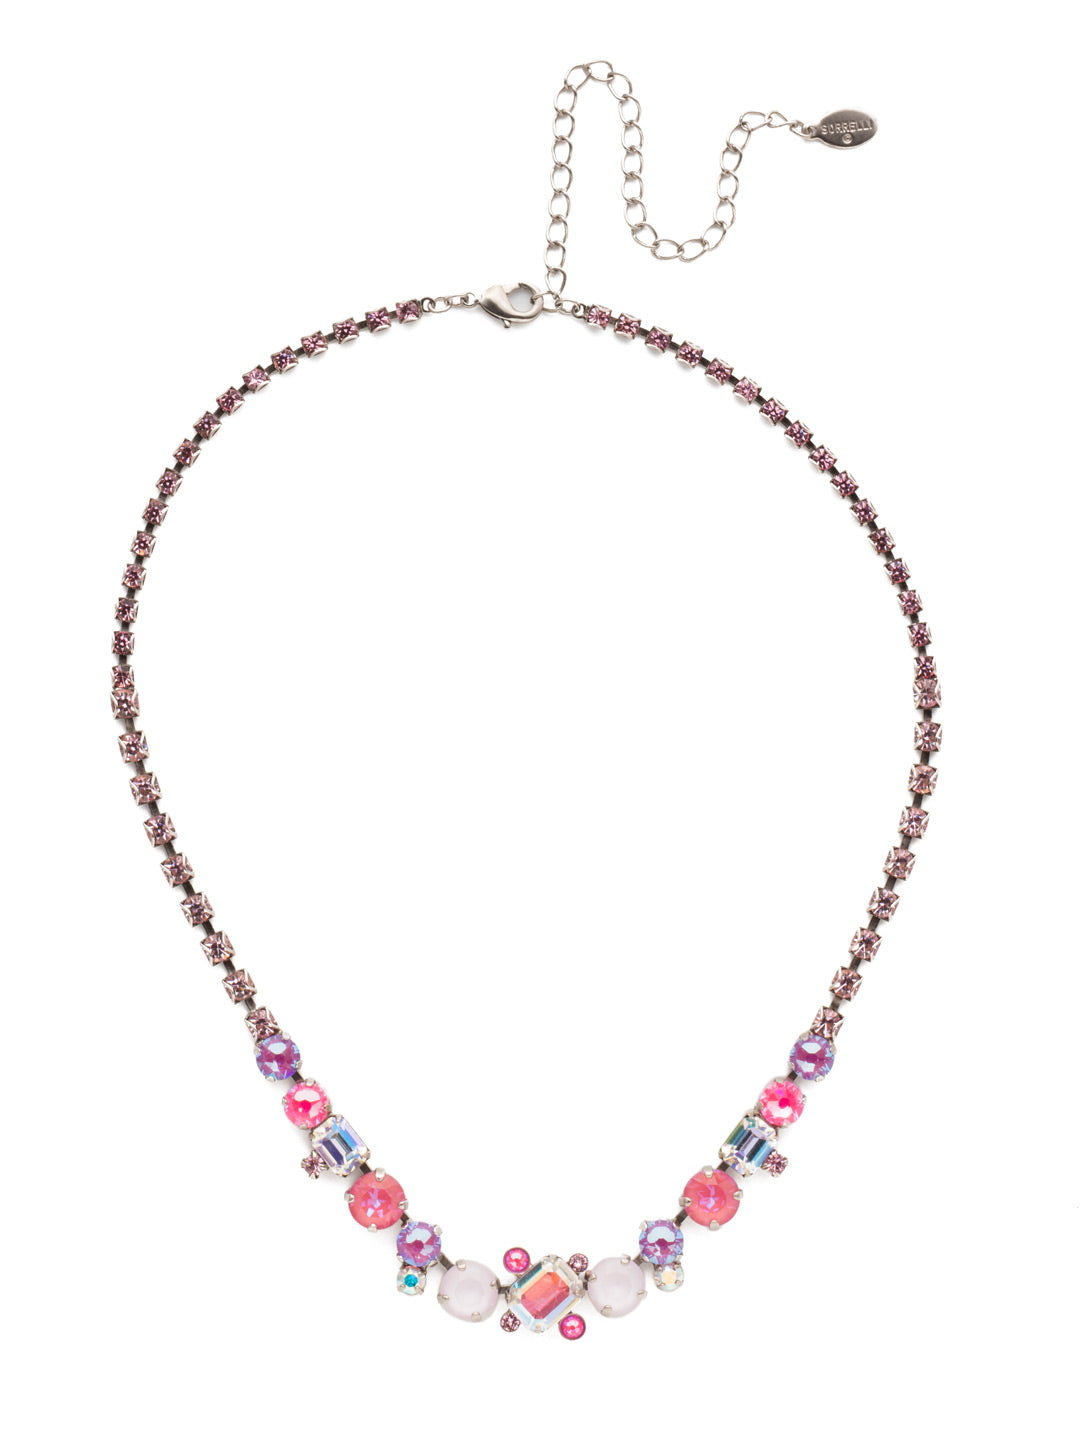 Tinsley Tennis Necklace - NEN17ASETP - The Tinsley Statement Necklace exudes drama. Every inch is encrusted in sparkling crystals competing to be noticed. Fasten it on when you're looking for some attention. From Sorrelli's Electric Pink collection in our Antique Silver-tone finish.